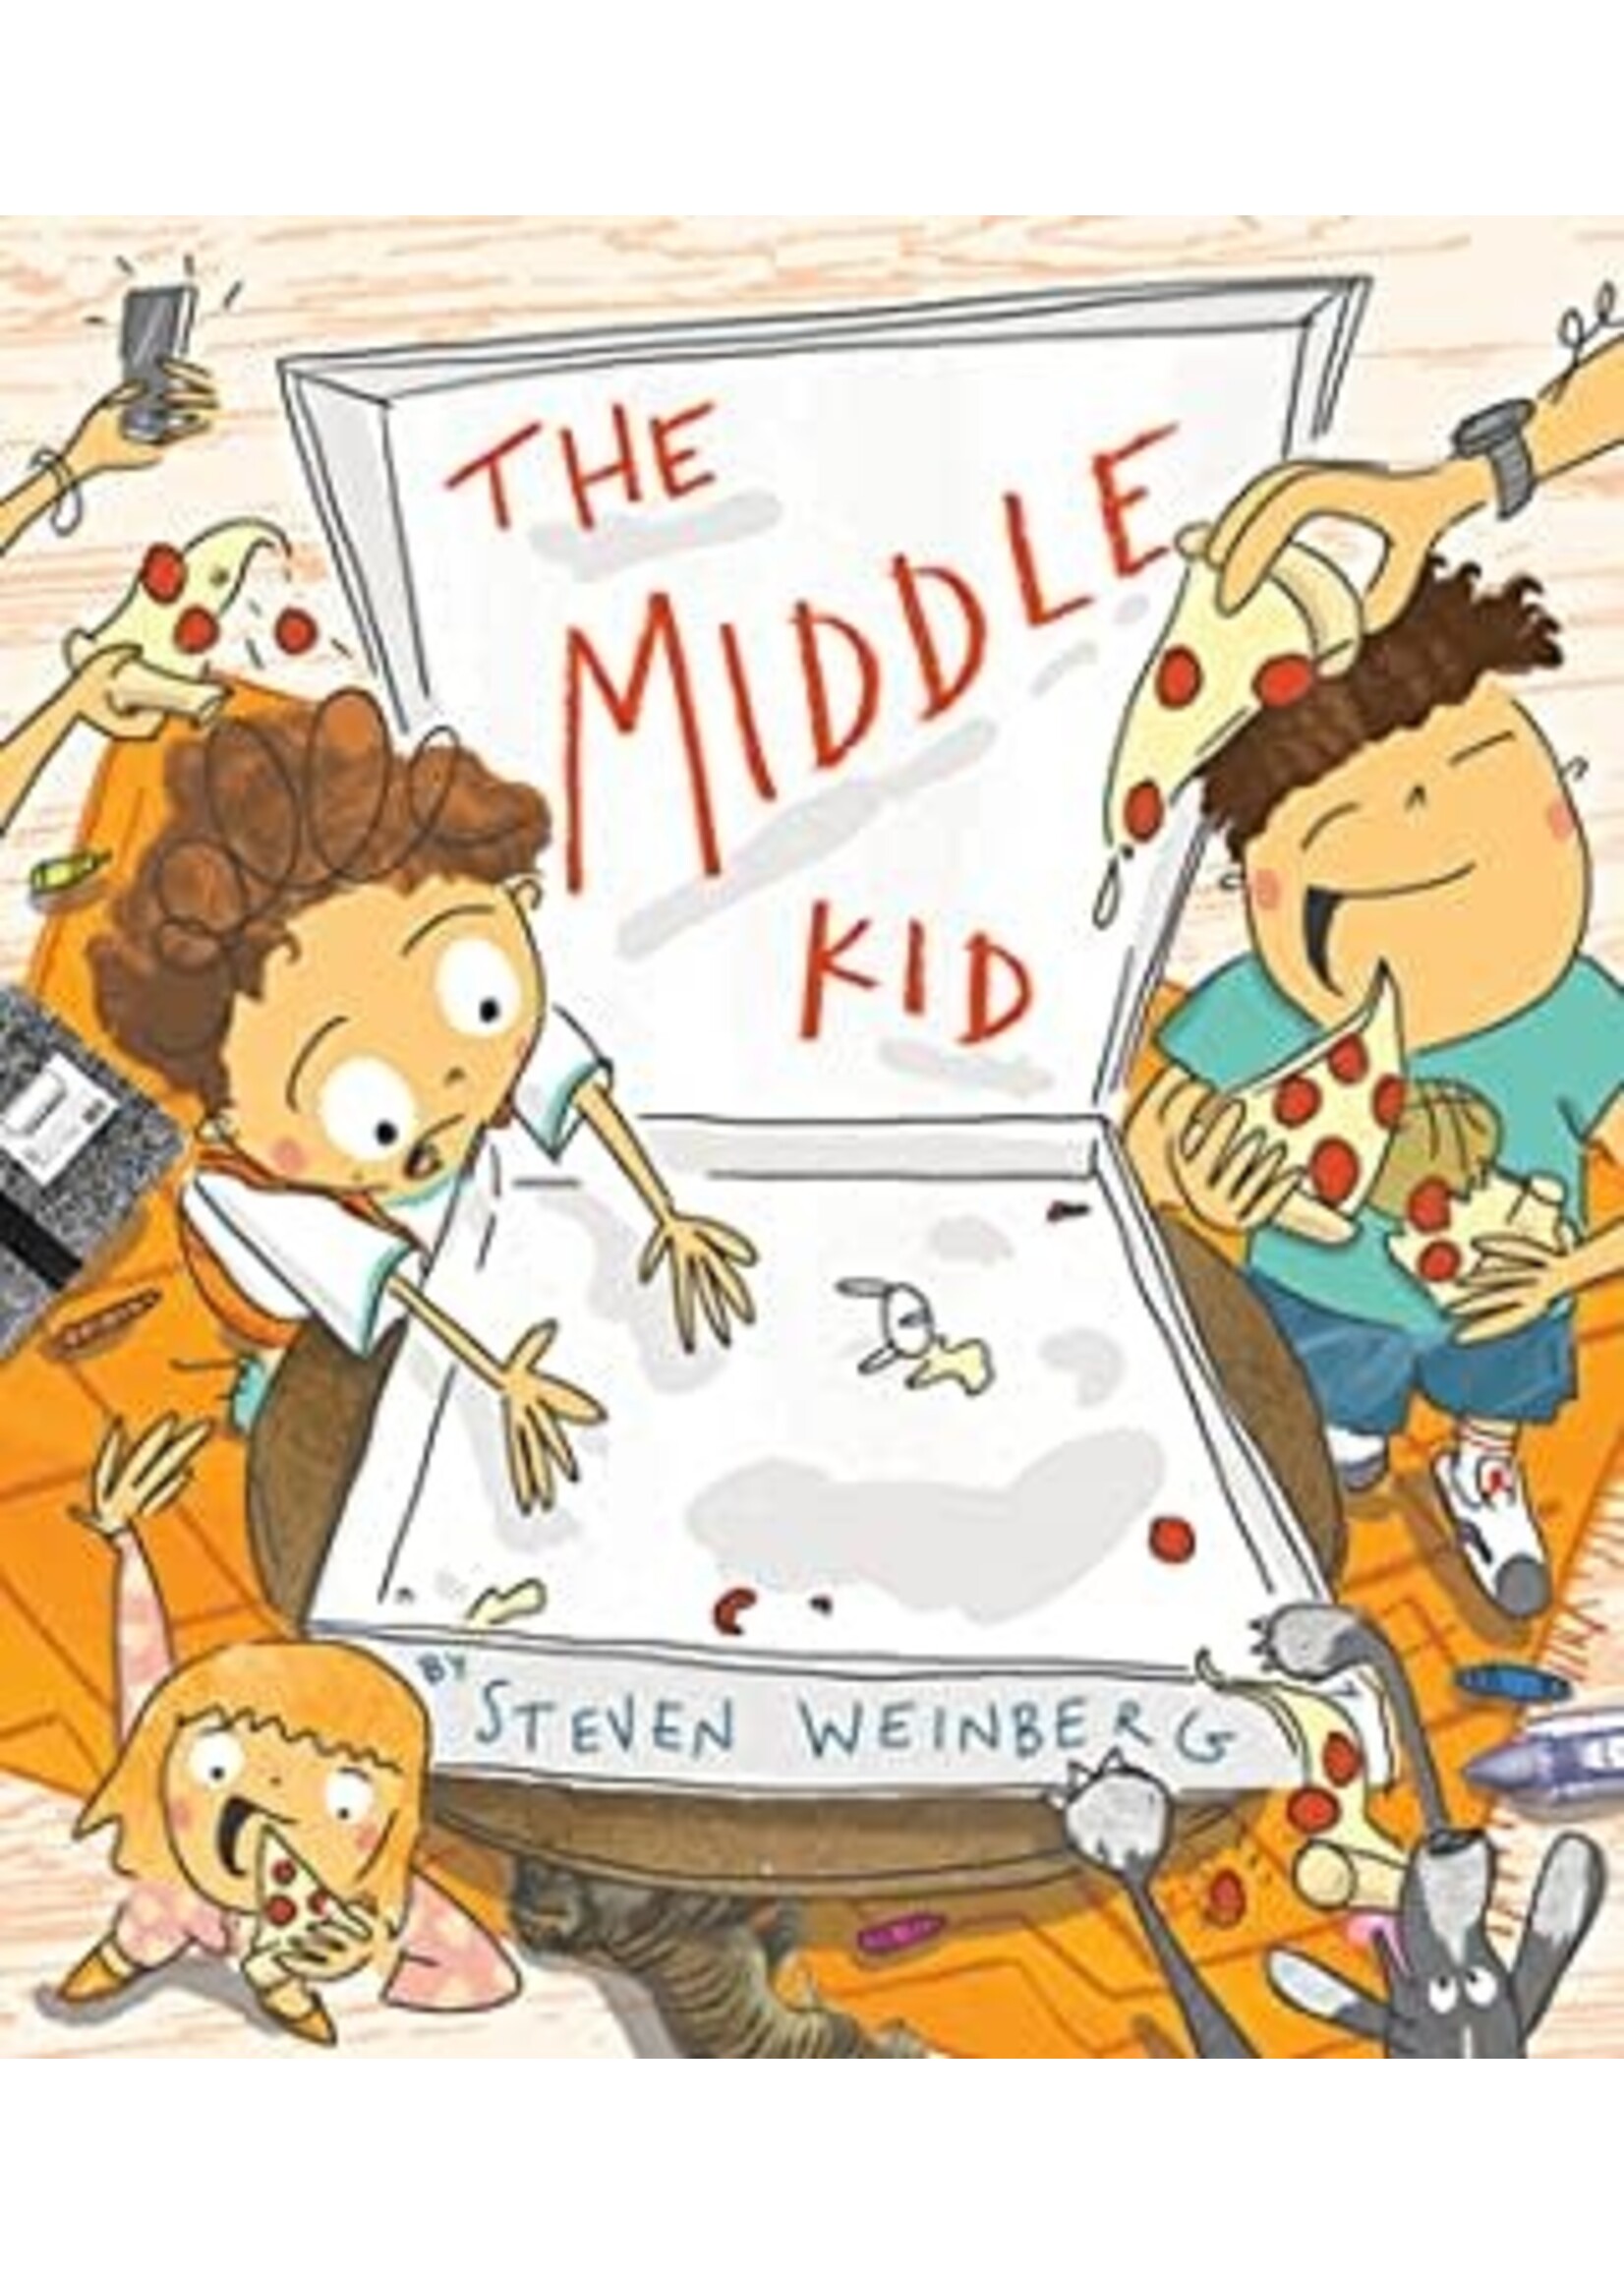 The Middle Kid by Steven Weinberg